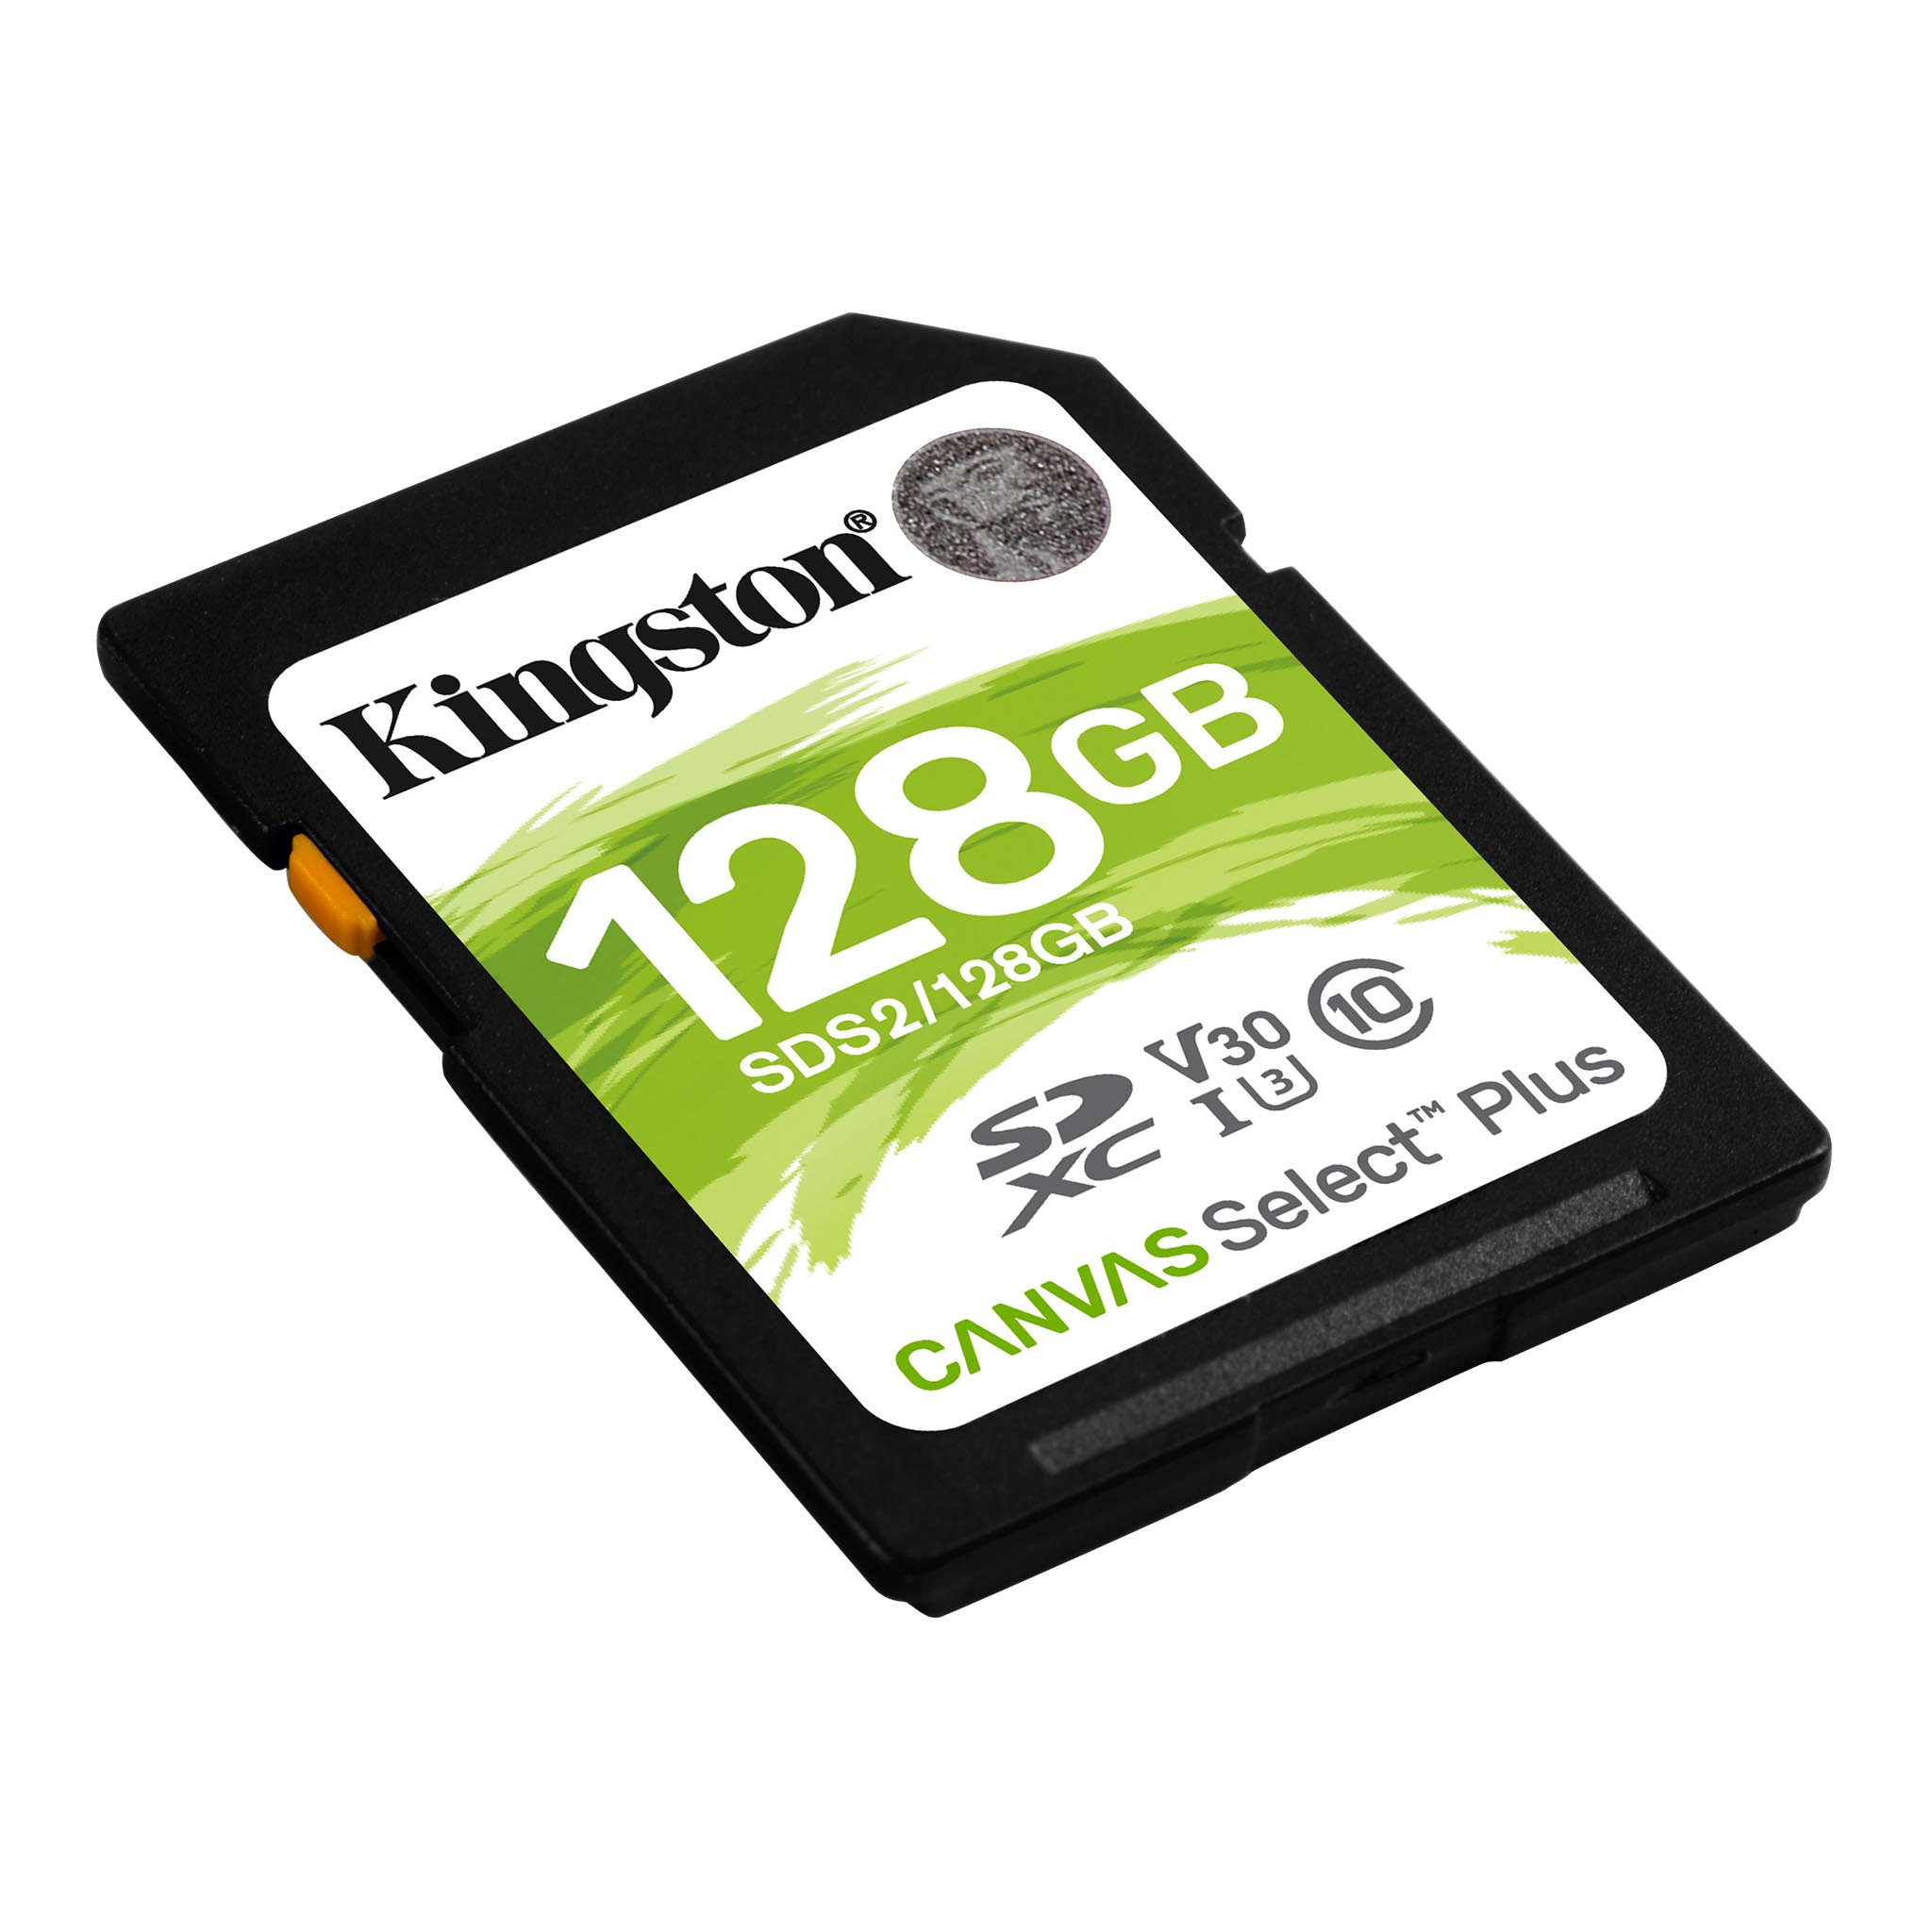 Kingston 32GB Sony C6806 MicroSDHC Canvas Select Plus Card Verified by SanFlash. 100MBs Works with Kingston 